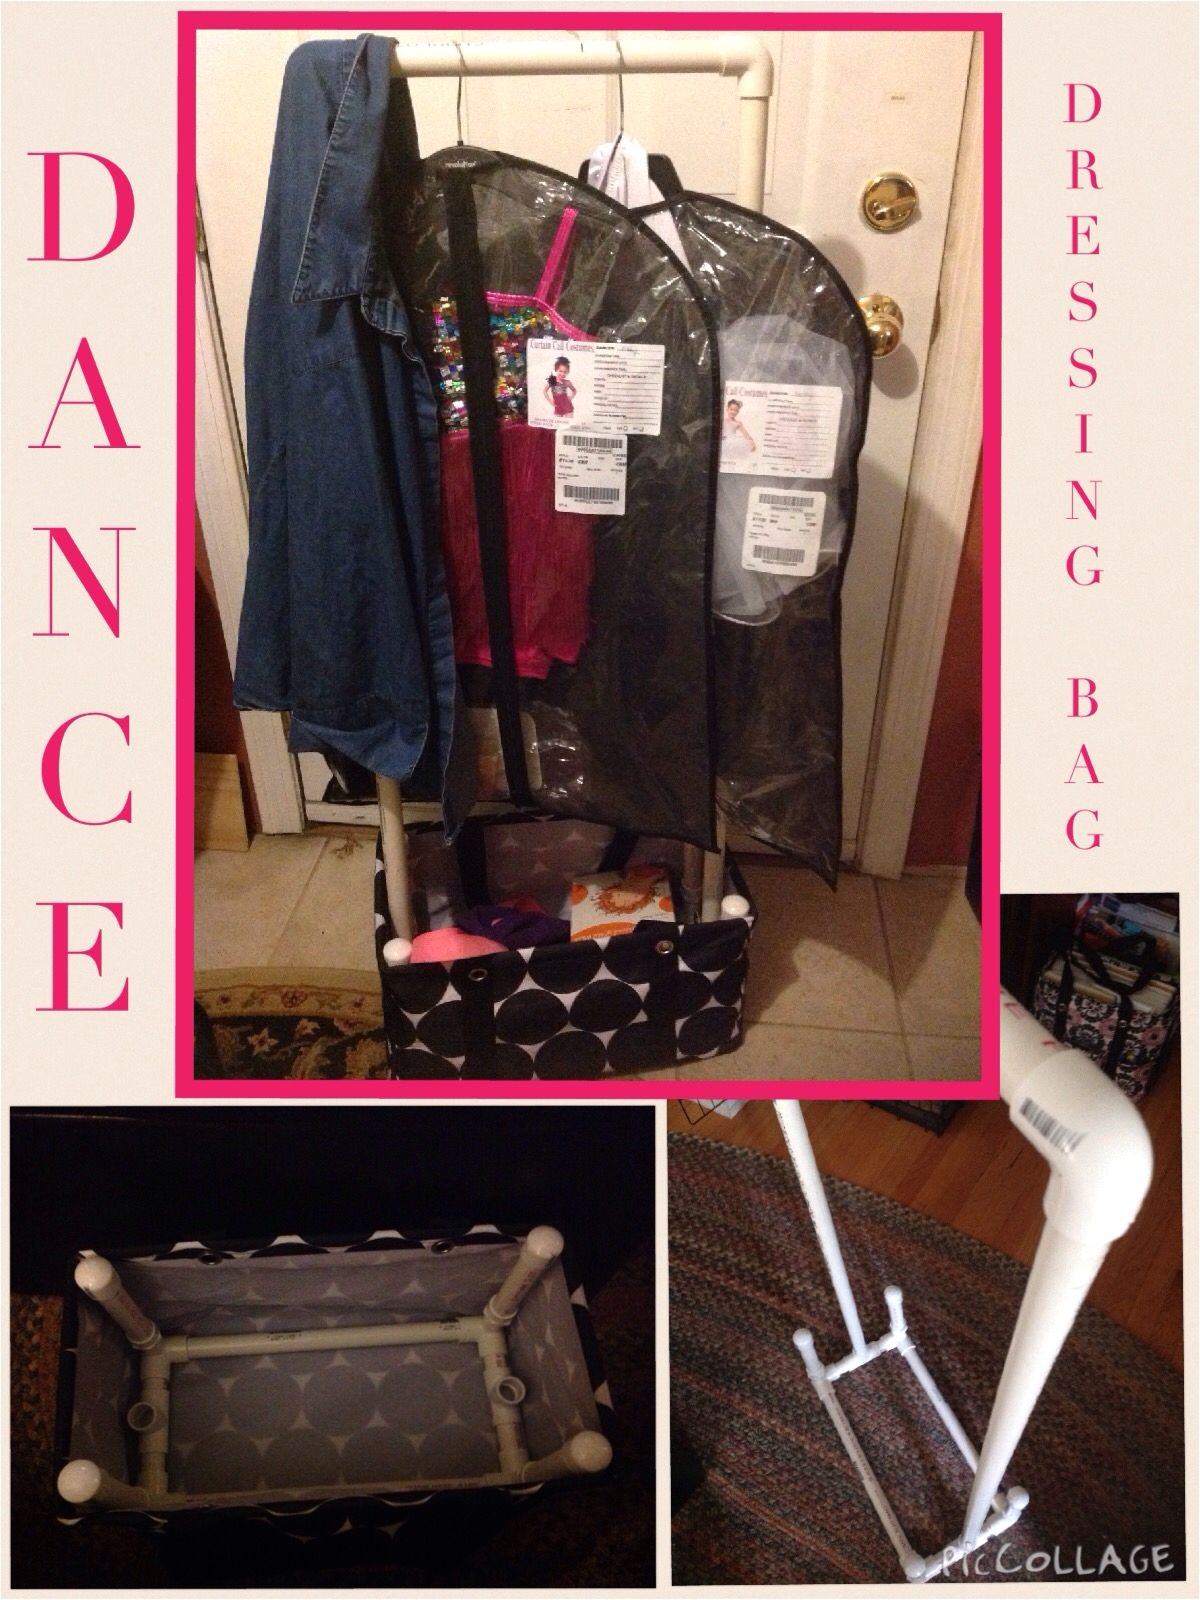 dressing bag station for any dance recital or competition about 30 in pvc piping and a 31 bag easy lightweight and transportable